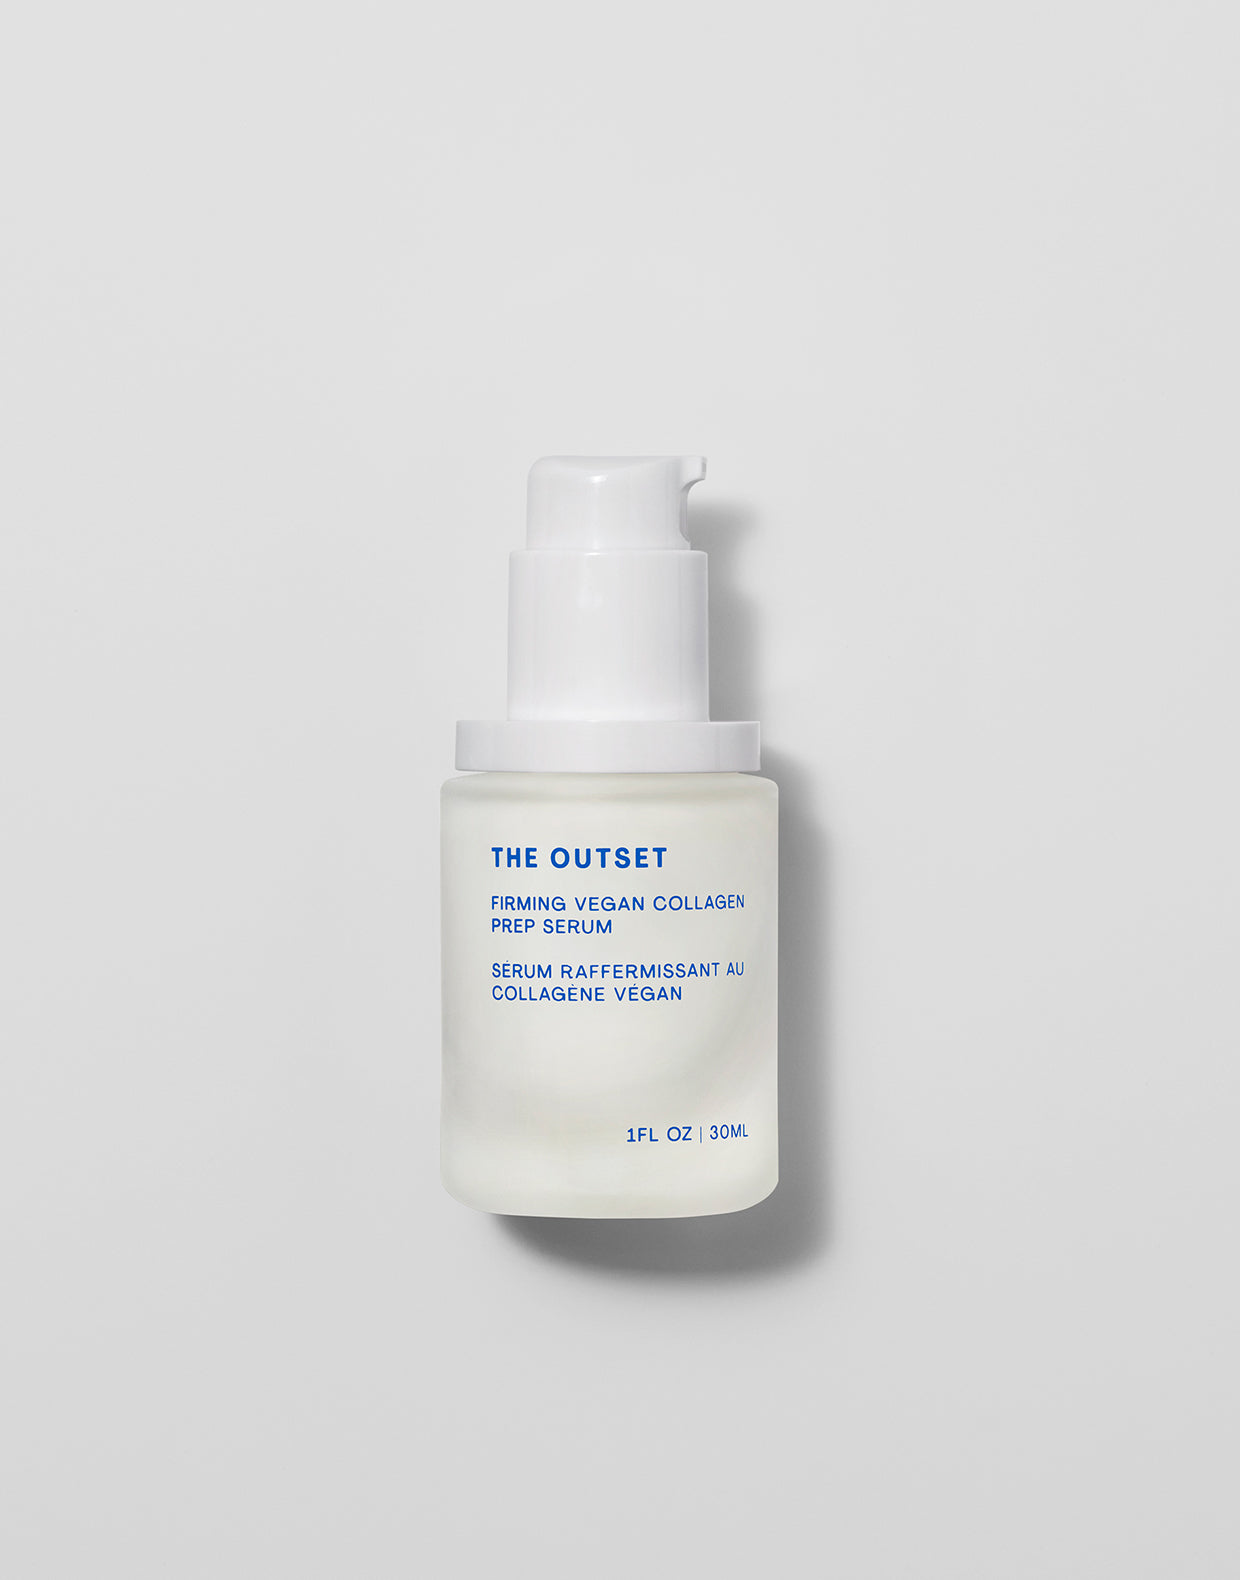 Front photo of The Outset's Firming Vegan Collagen Prep Serum with cap off